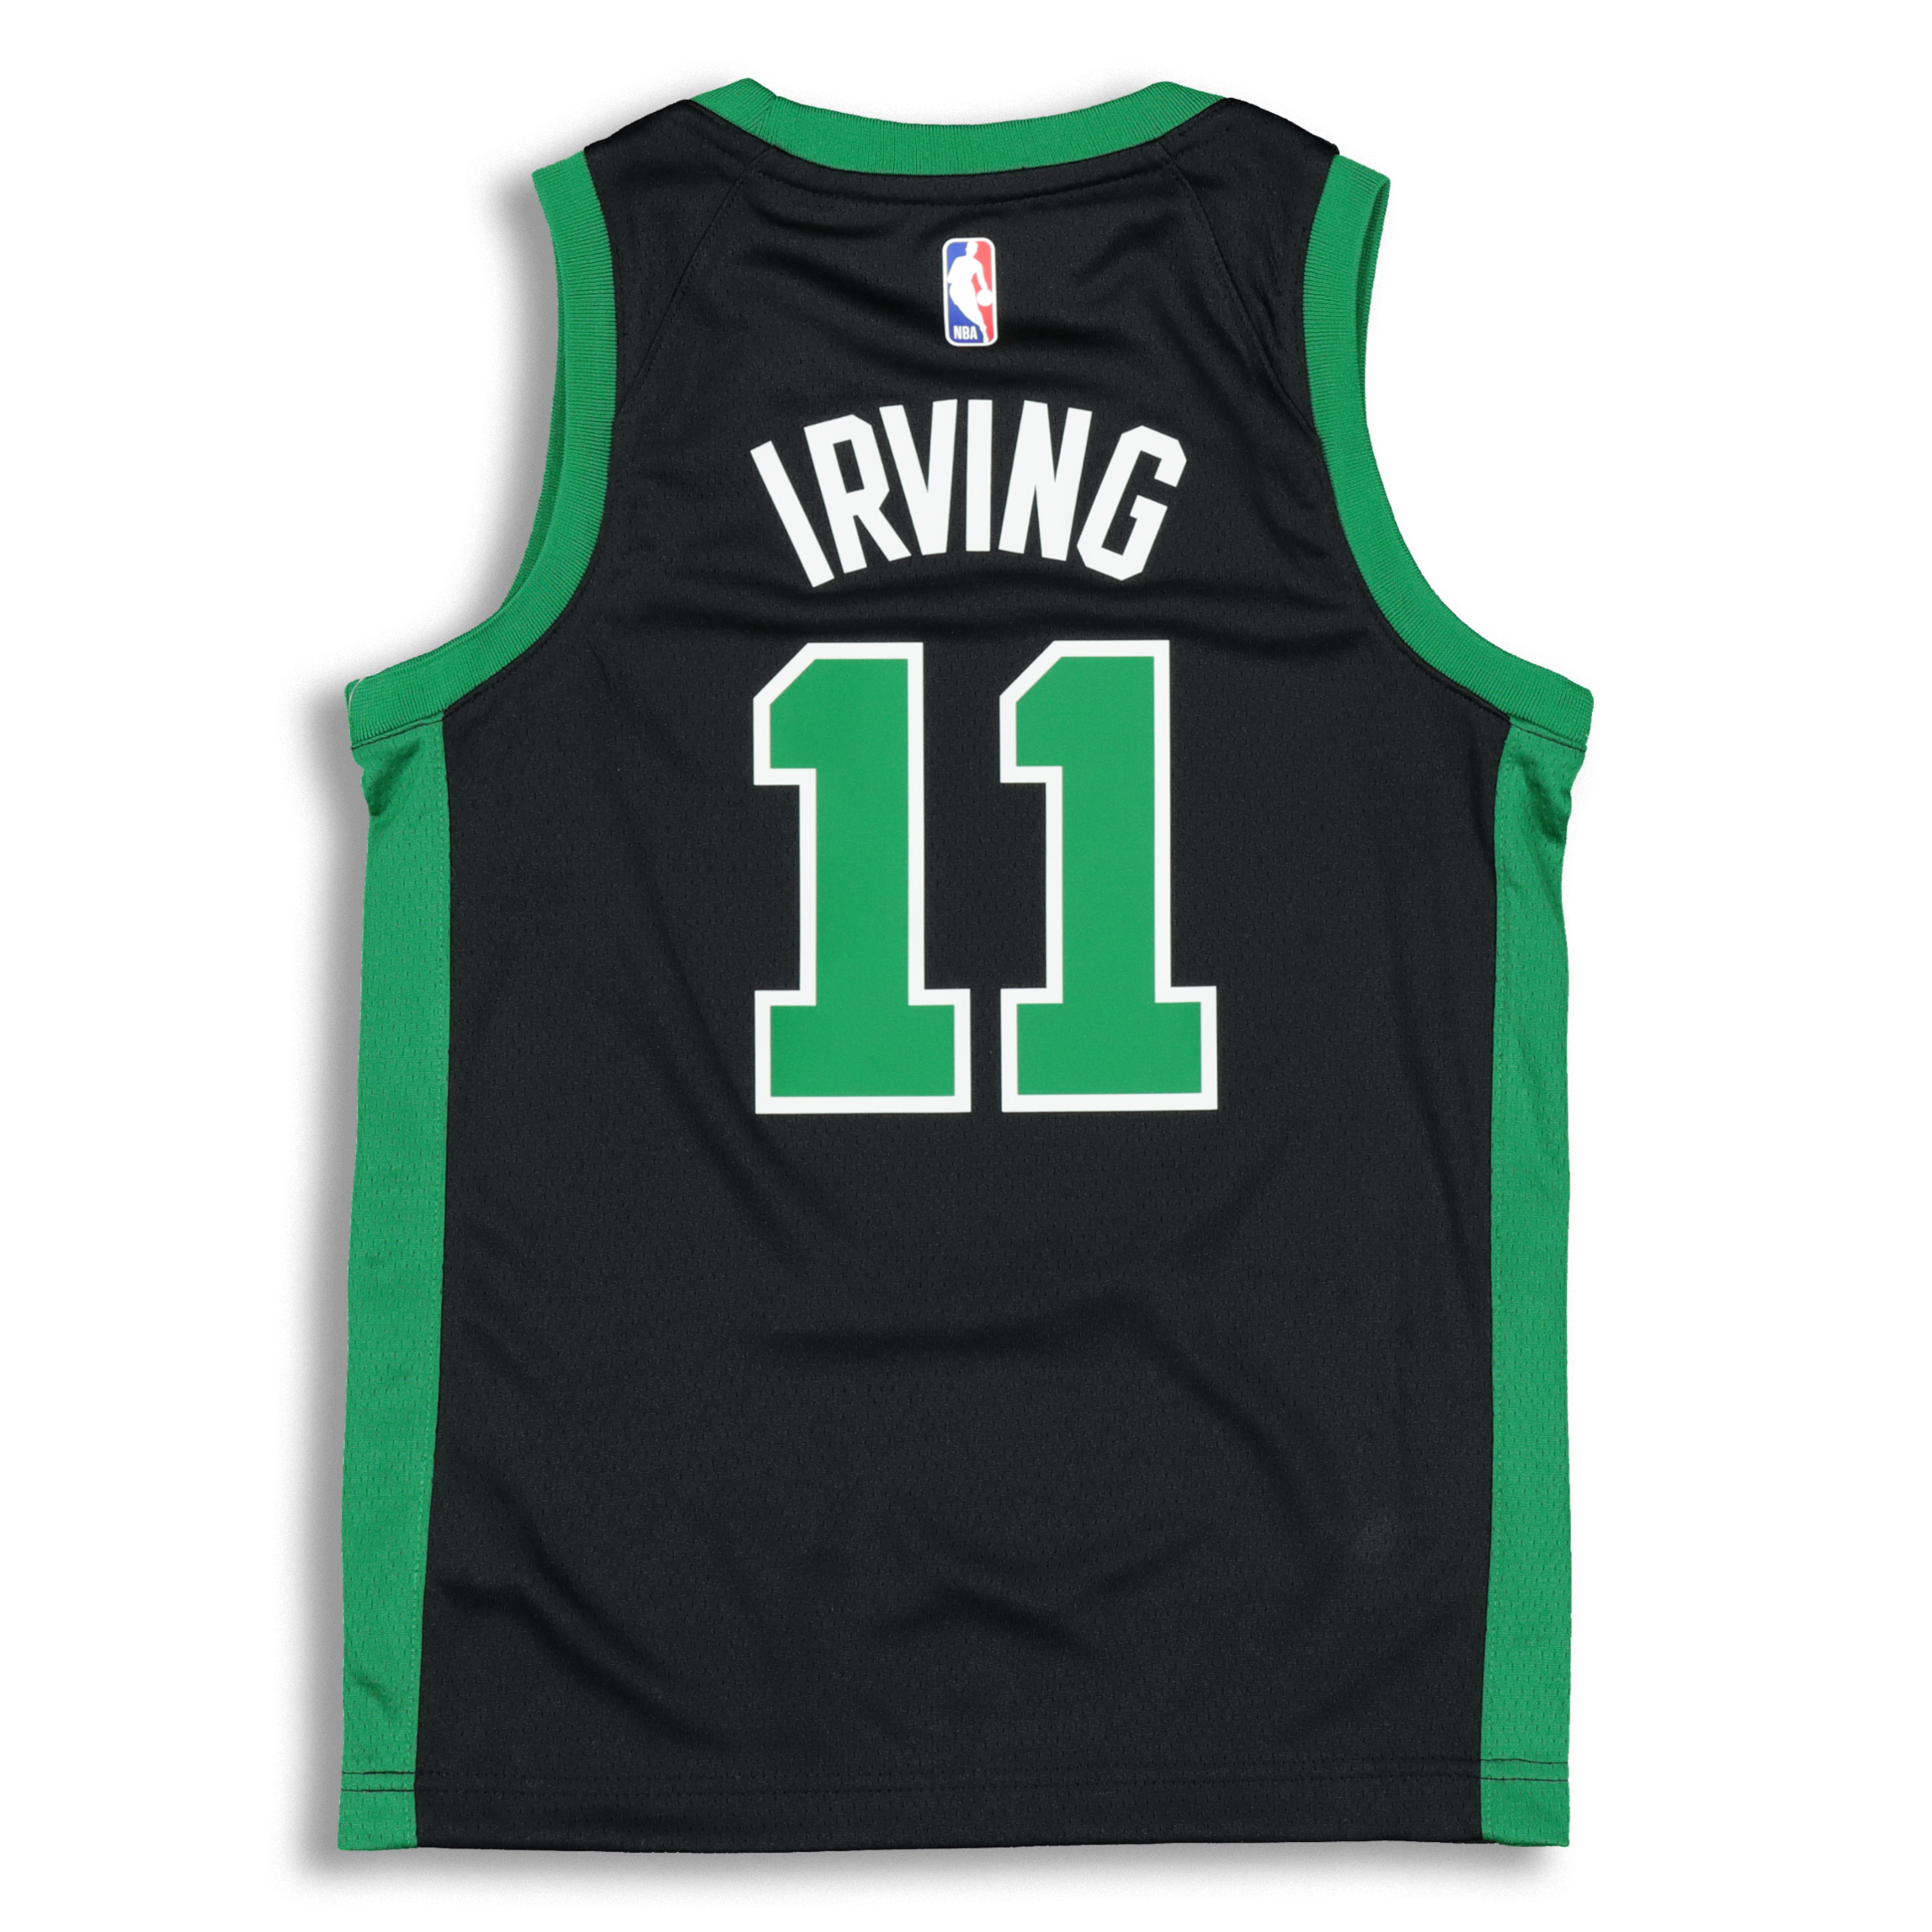 kyrie irving youth large jersey